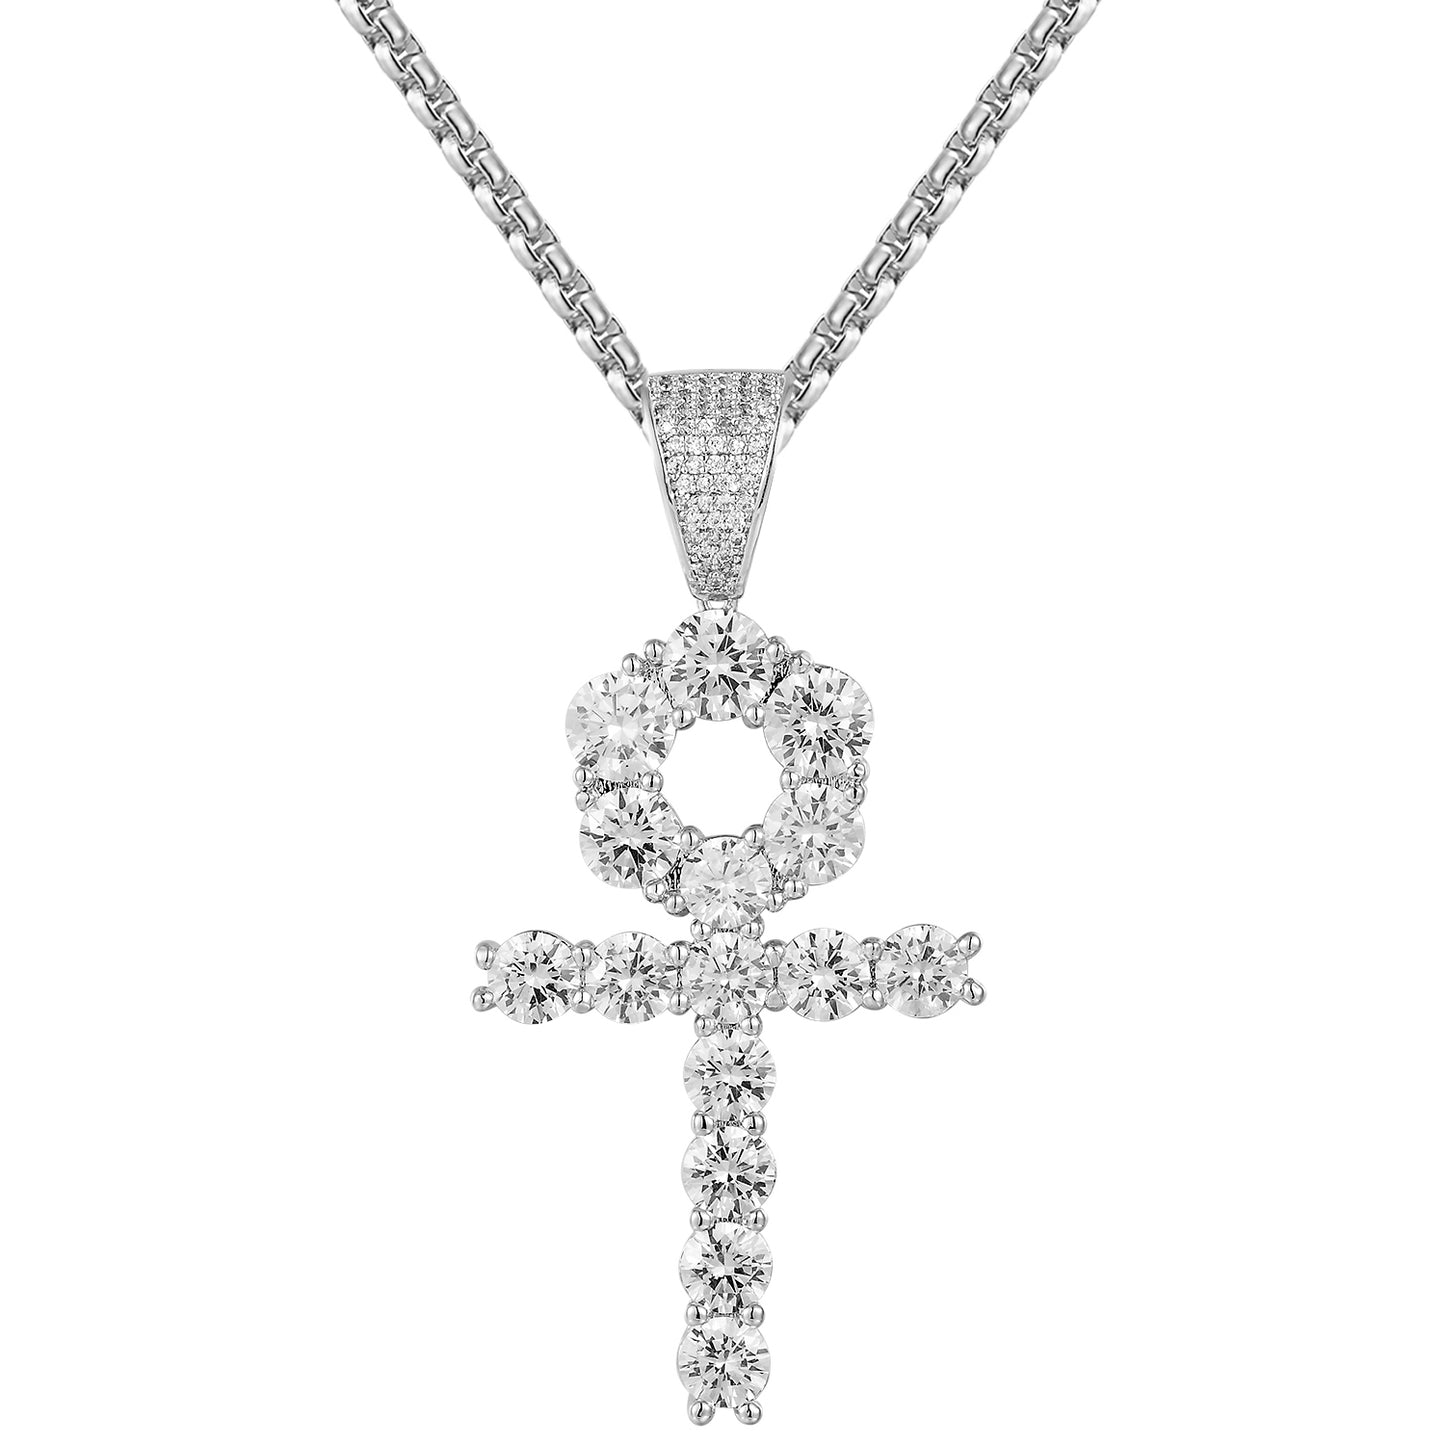 Solitaire Religious Ankh Cross Sterling Silver Pendant Chain